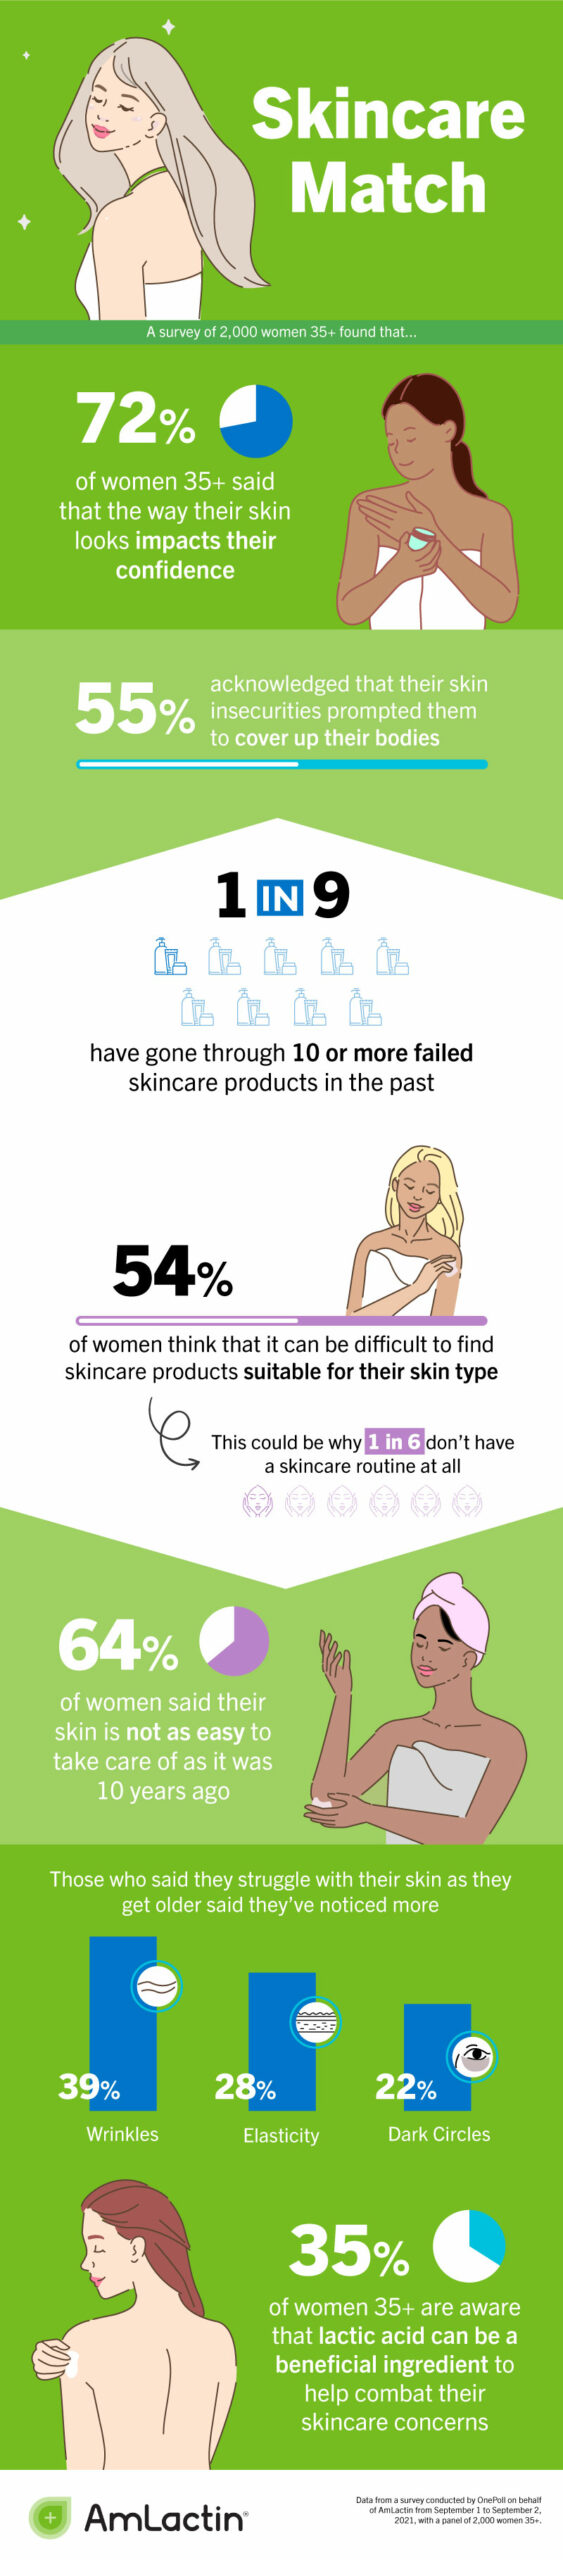 Women take this long to decide if a new skincare product works for